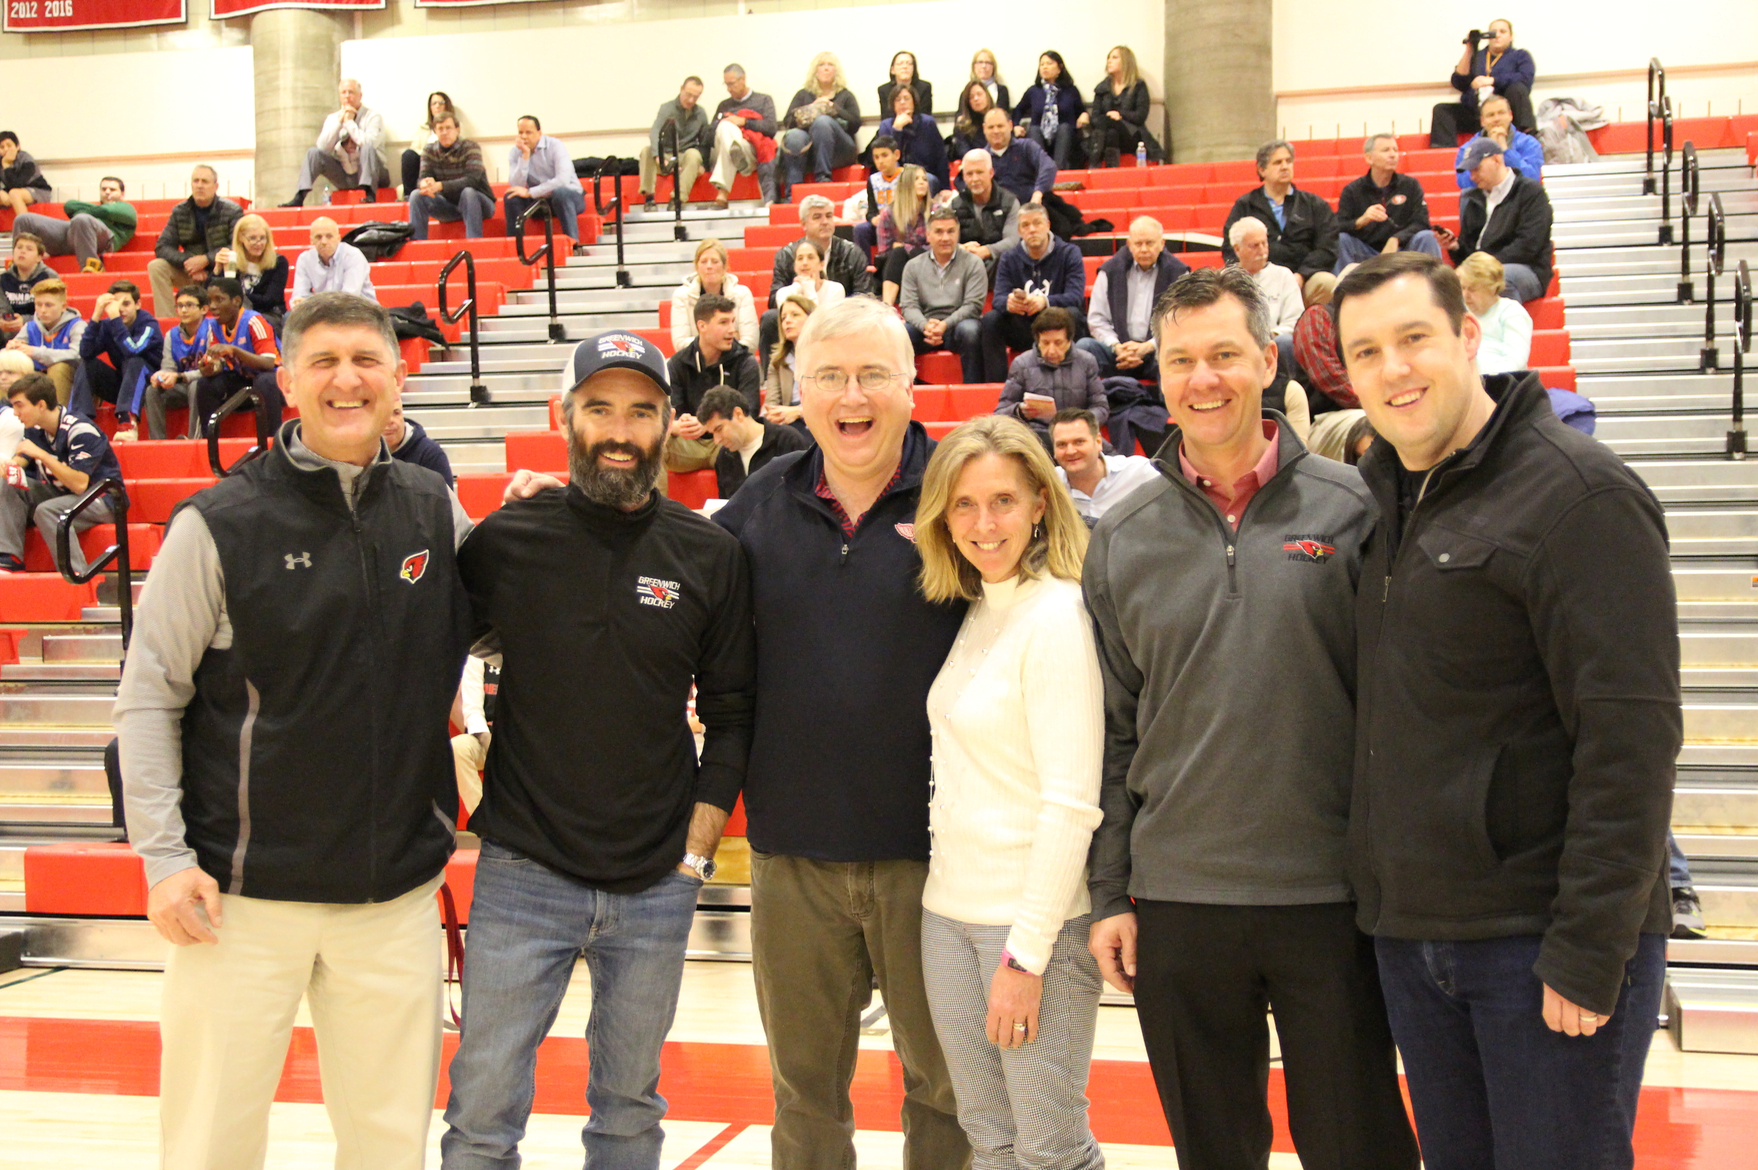 At the dedication for the new bleachers at the GHS gymnasium, Athletic Director Gus Lindine, GAF's Lee Milazzo, Richard Fulton, Casey Fulton, and hockey Coach Chris Rurak and Rob Burton. Feb 9, 2018 Photo: Leslie yager